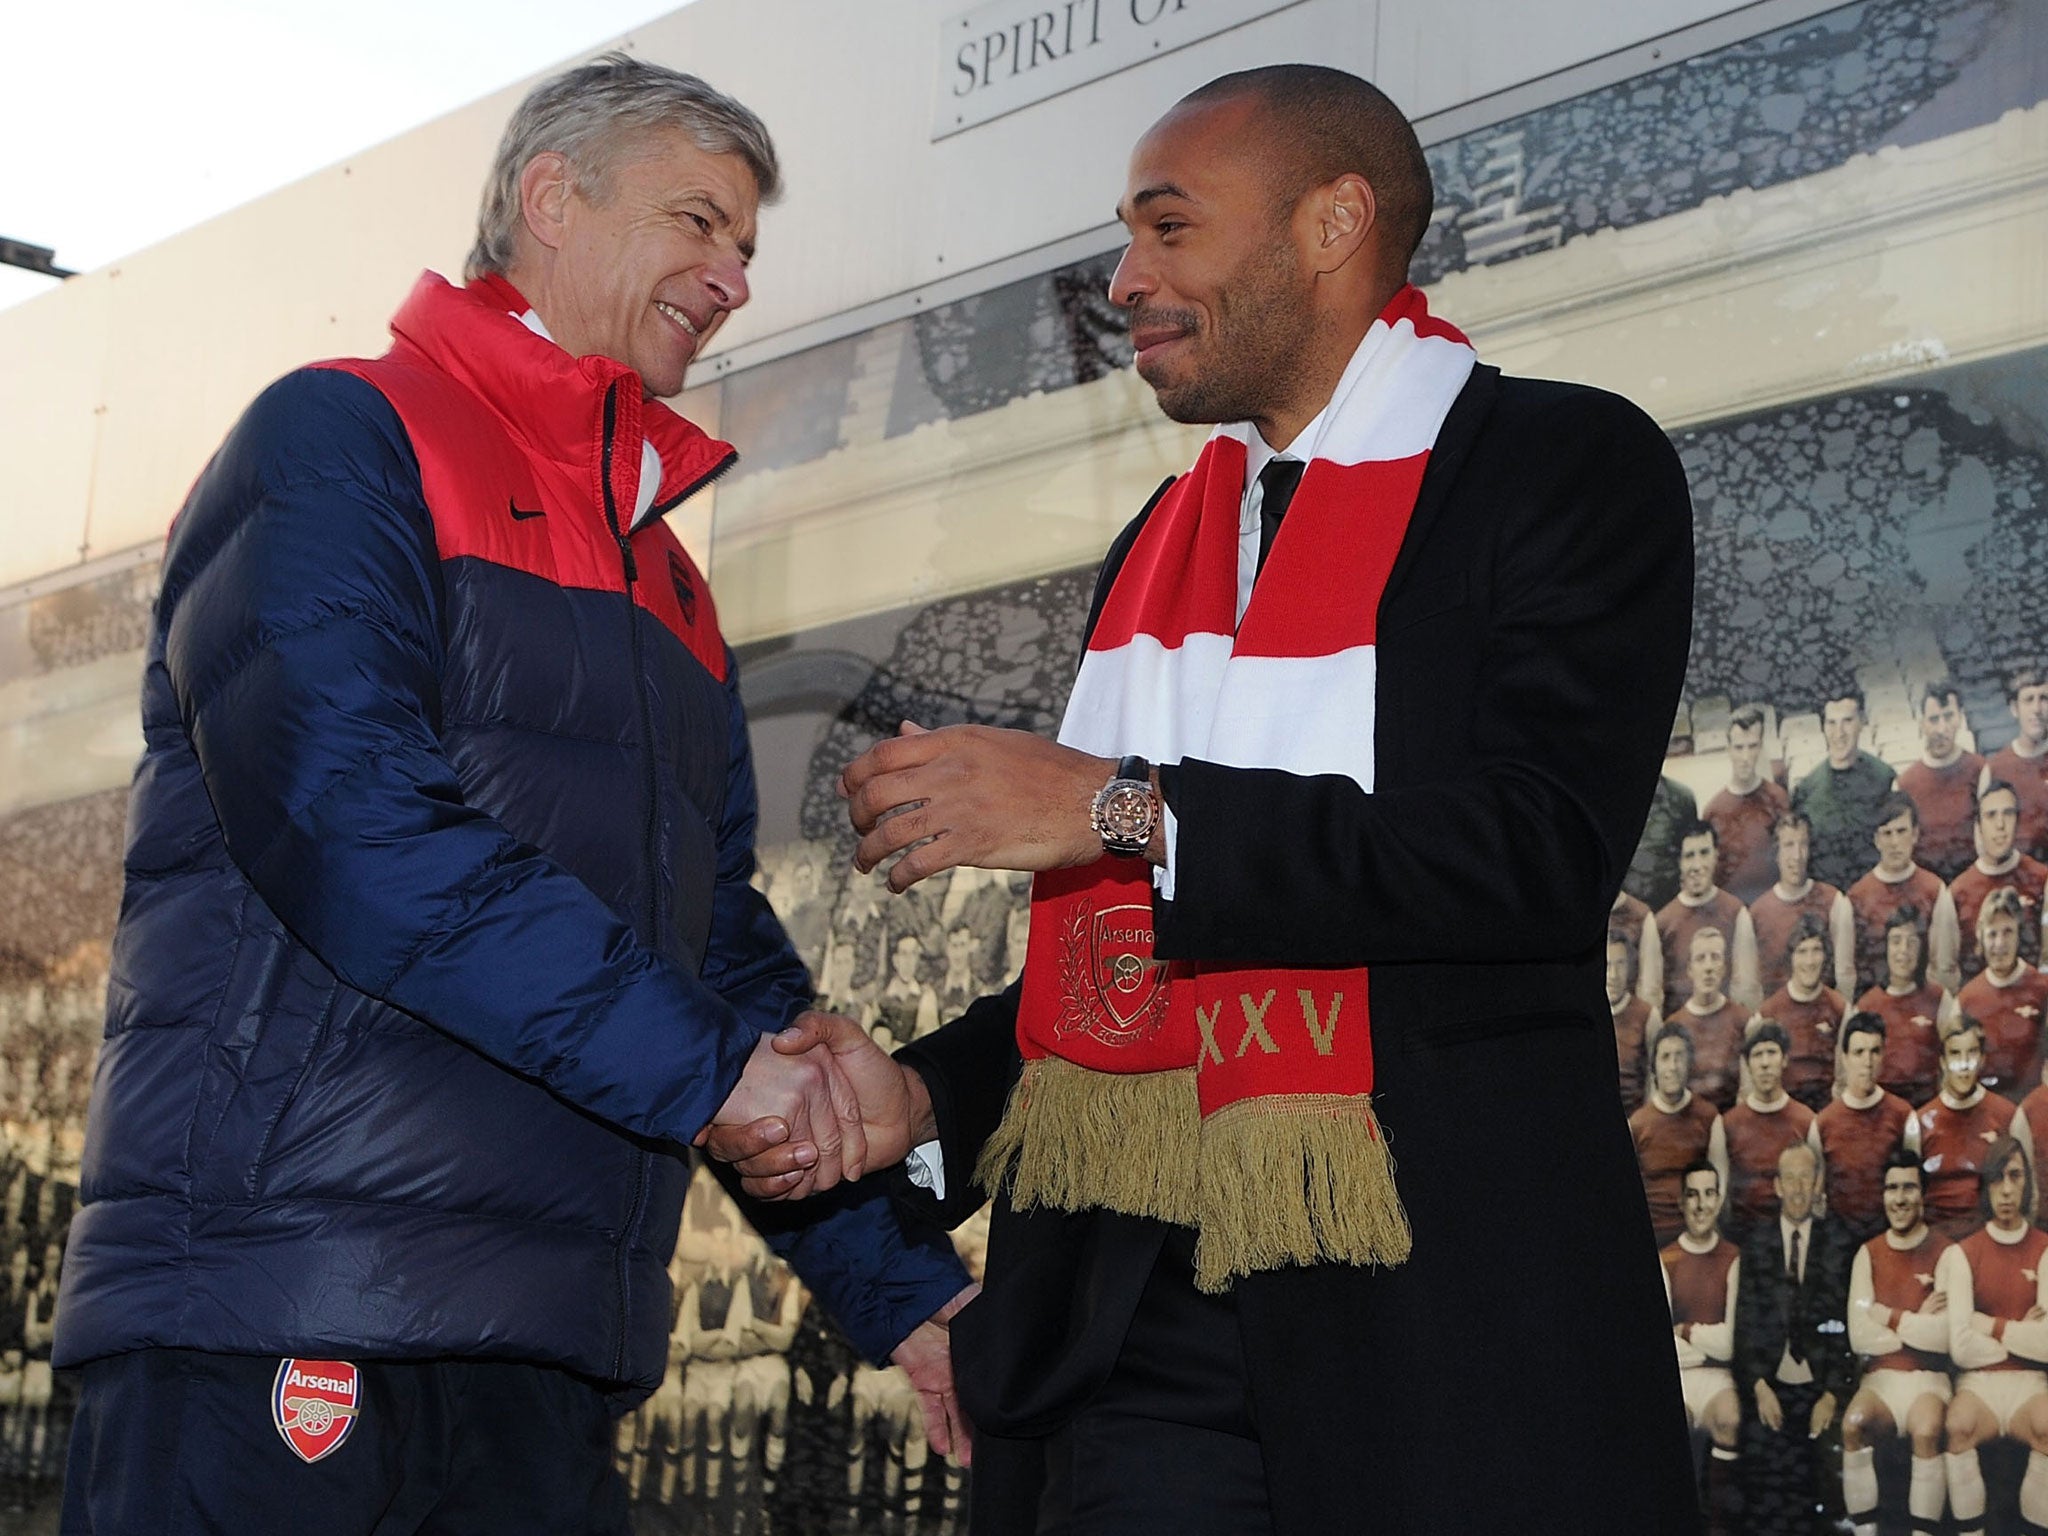 Thierry Henry should adopt an ambassadorial role at Arsenal like Patrick Vieira’s at Manchester City, Alisher Usmanov believes